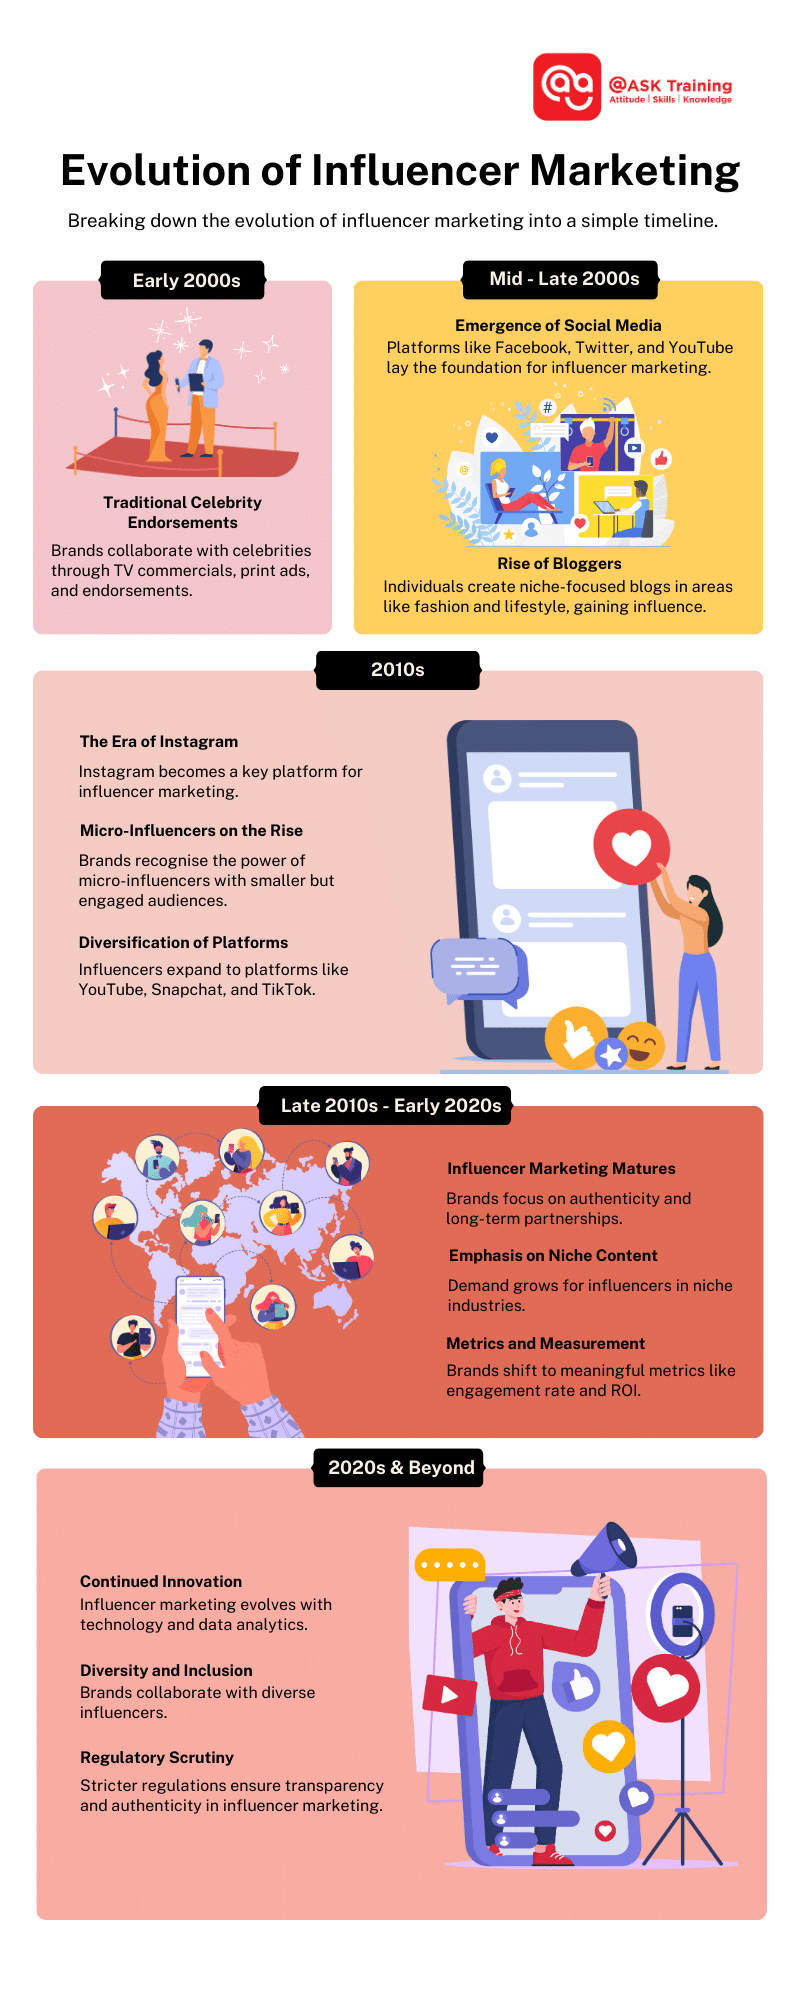 An infographic on the evolution of influencer marketing